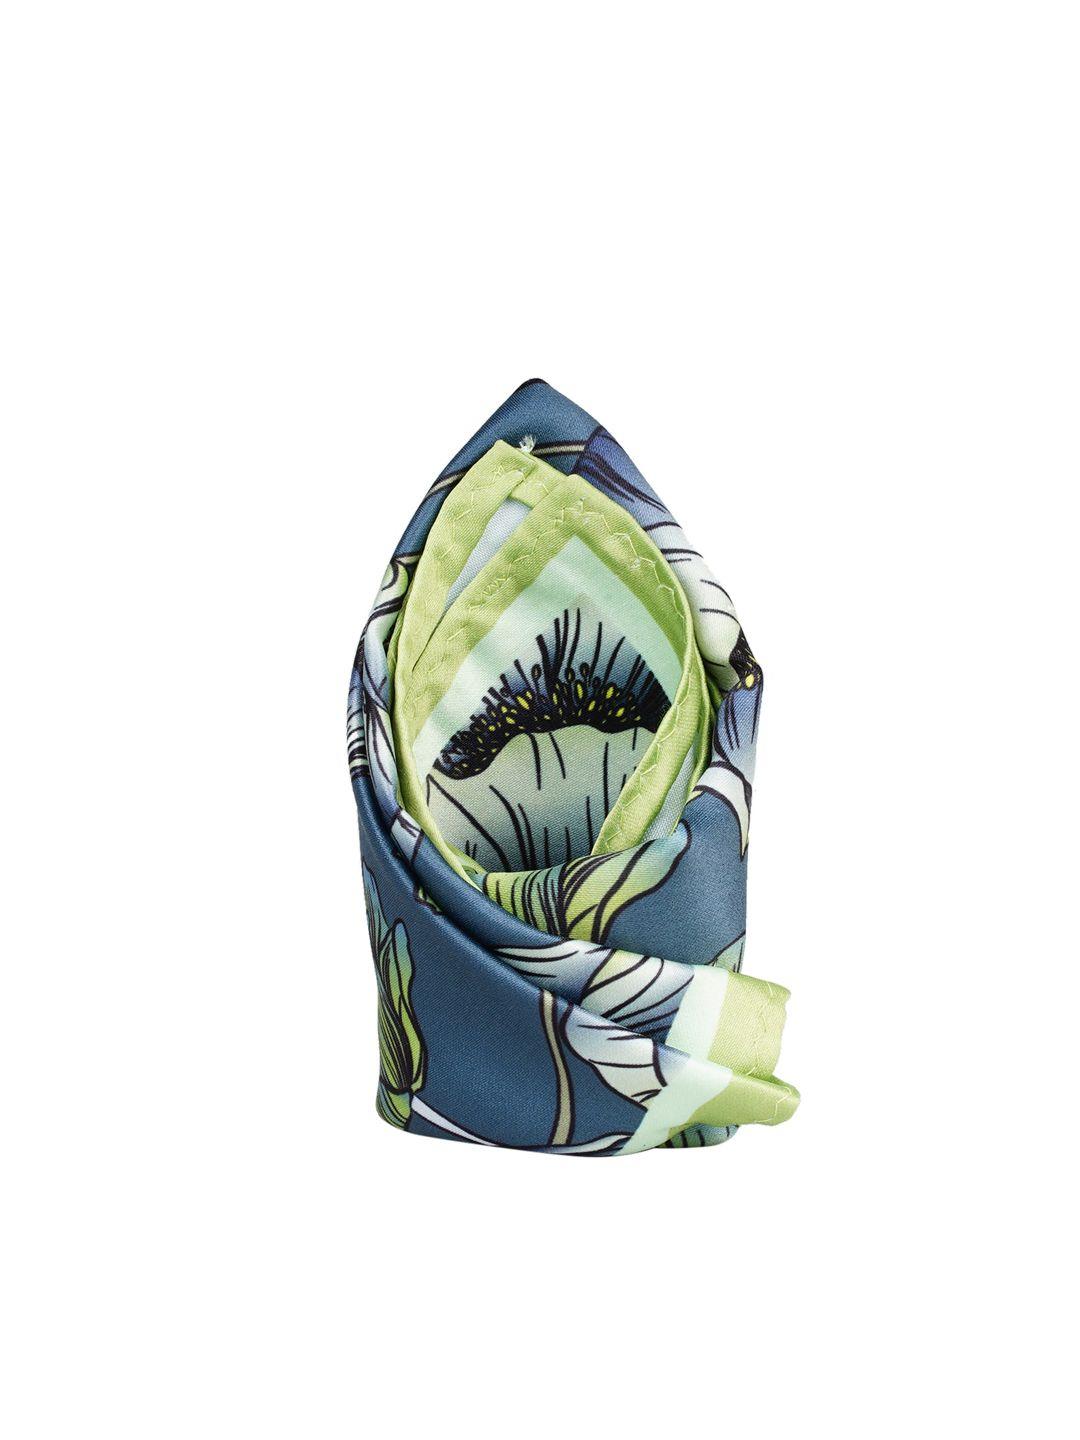 tossido navy blue & green floral printed pocket square